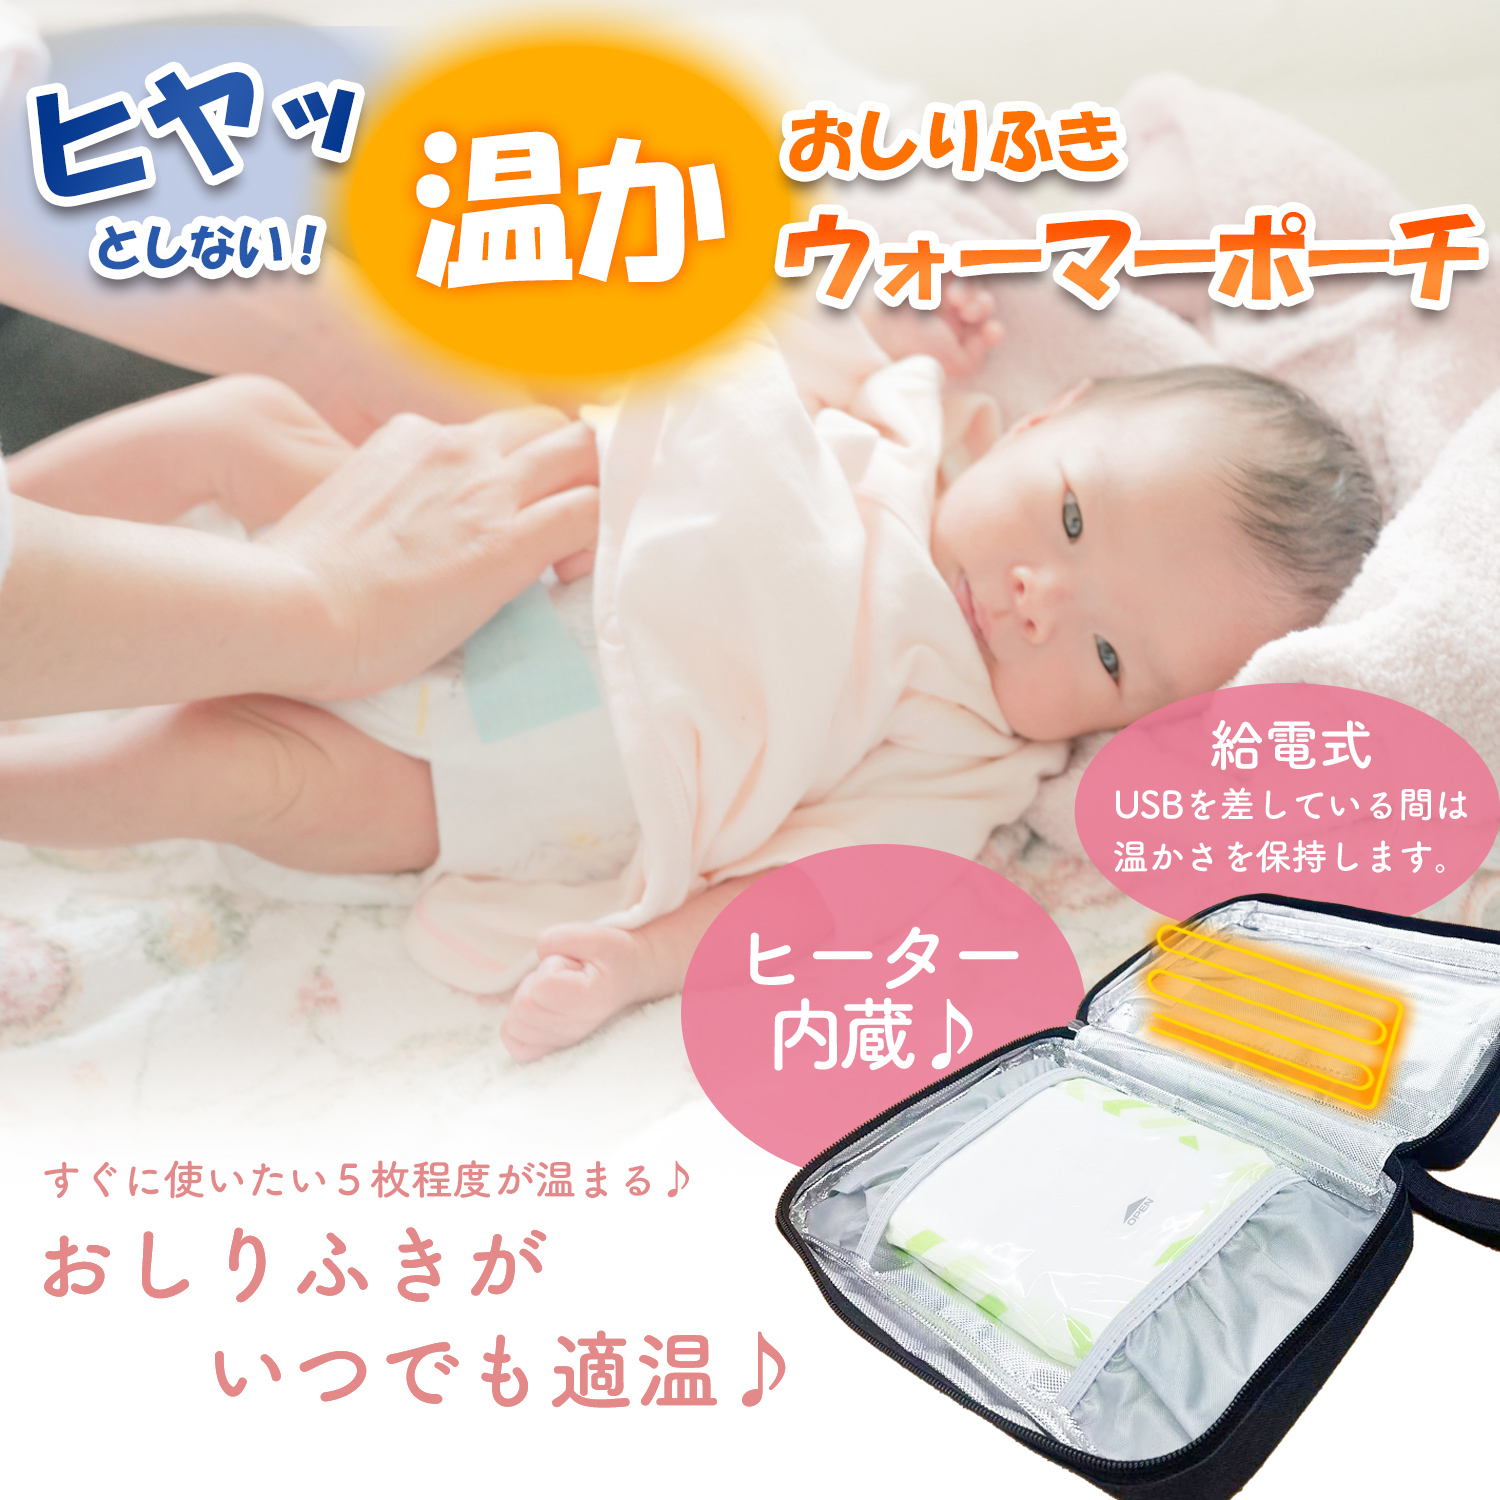  pre-moist wipes warmer pre-moist wipes case pouch celebration of a birth wet wipe pouch .... temperature . vessel baby baby carrying USB type warm protection against cold 